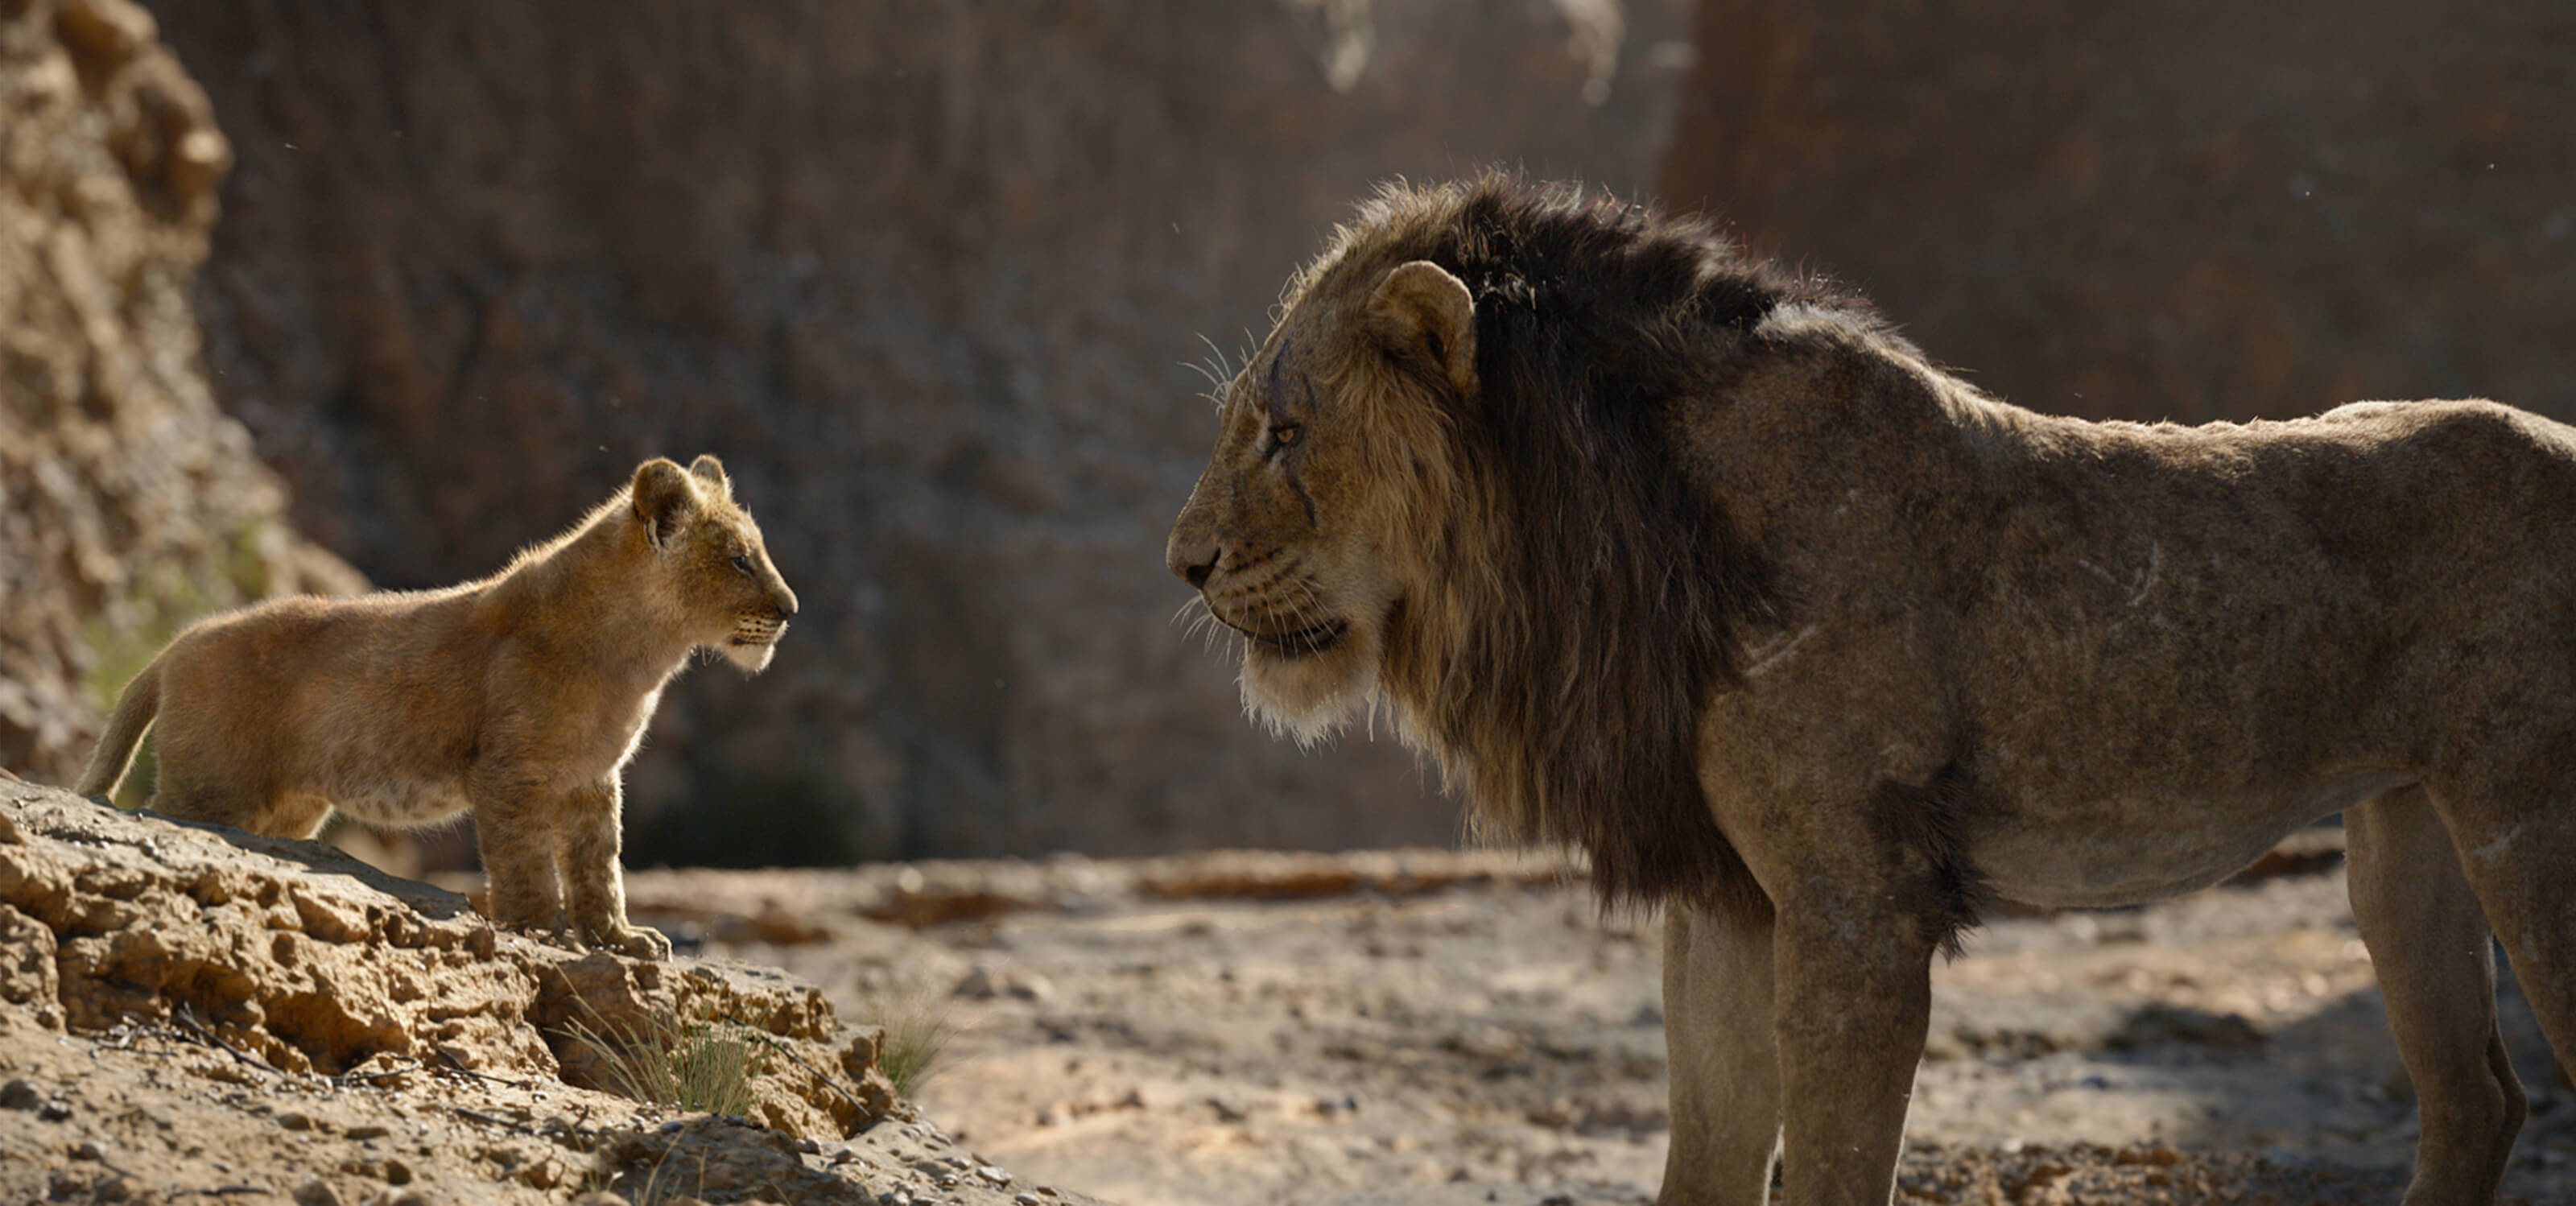 Simba and Mufasa speak to one another in the African savannah in The Lion King.